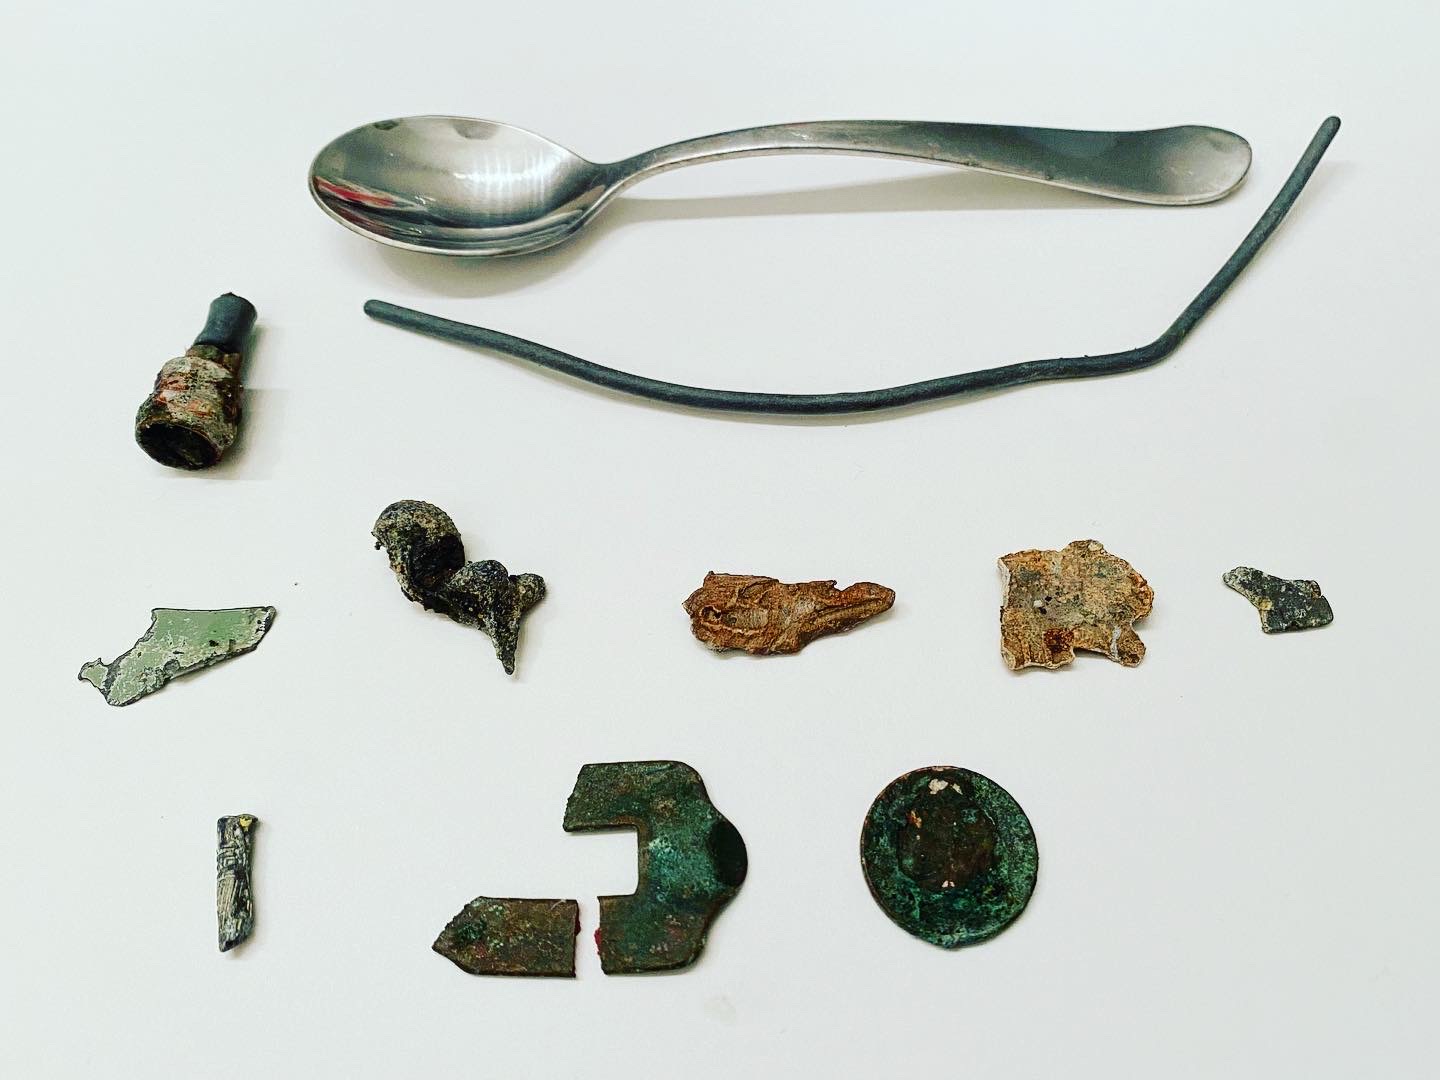 Beach metal detecting finds including a spoon, shoe buckle, and metal scraps